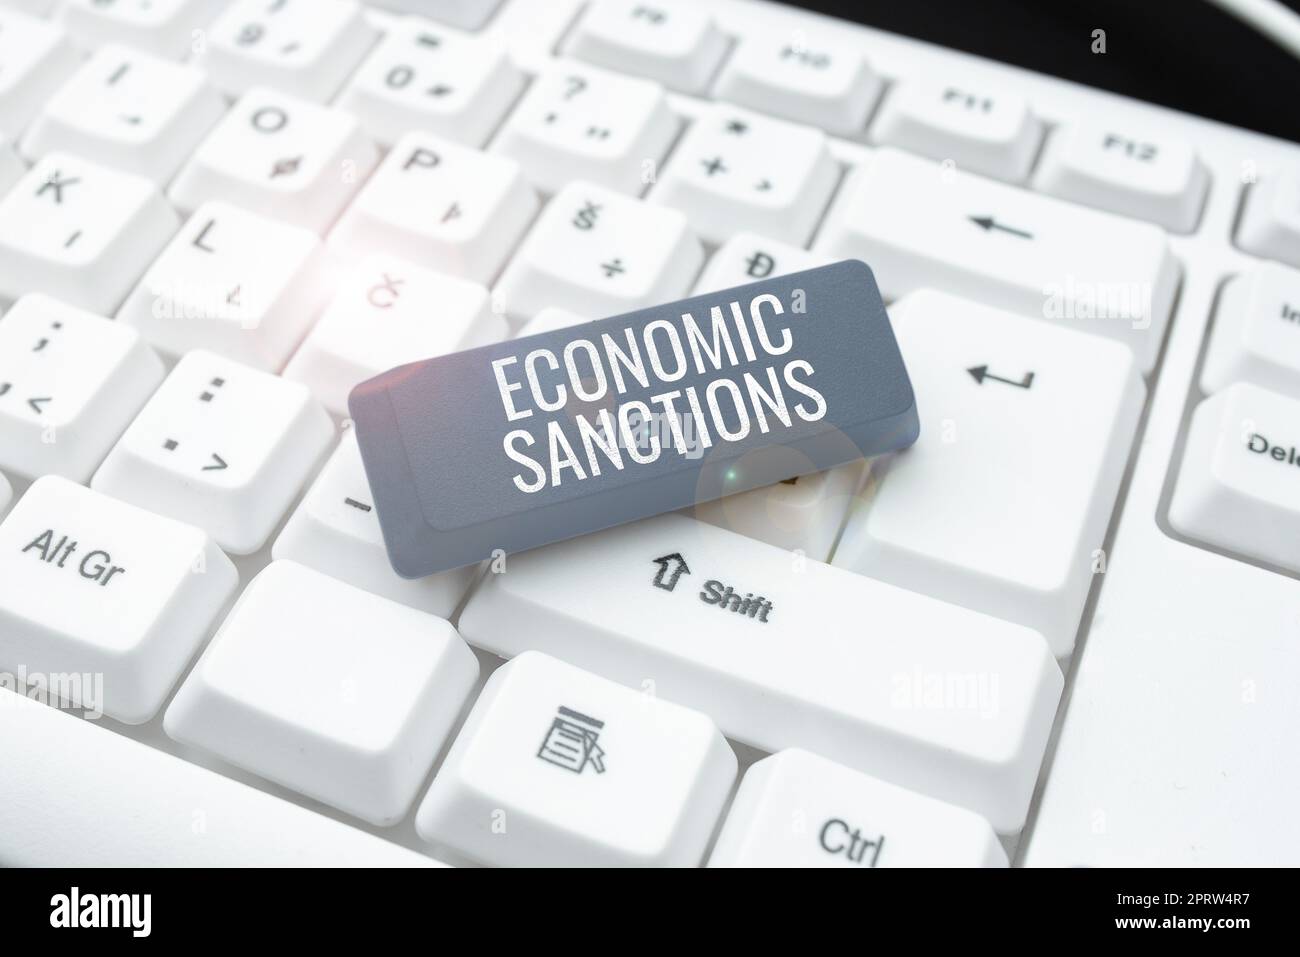 Sign displaying Economic SanctionsPenalty Punishment levied on another country Trade war. Business concept Penalty Punishment levied on another country Trade war Stock Photo